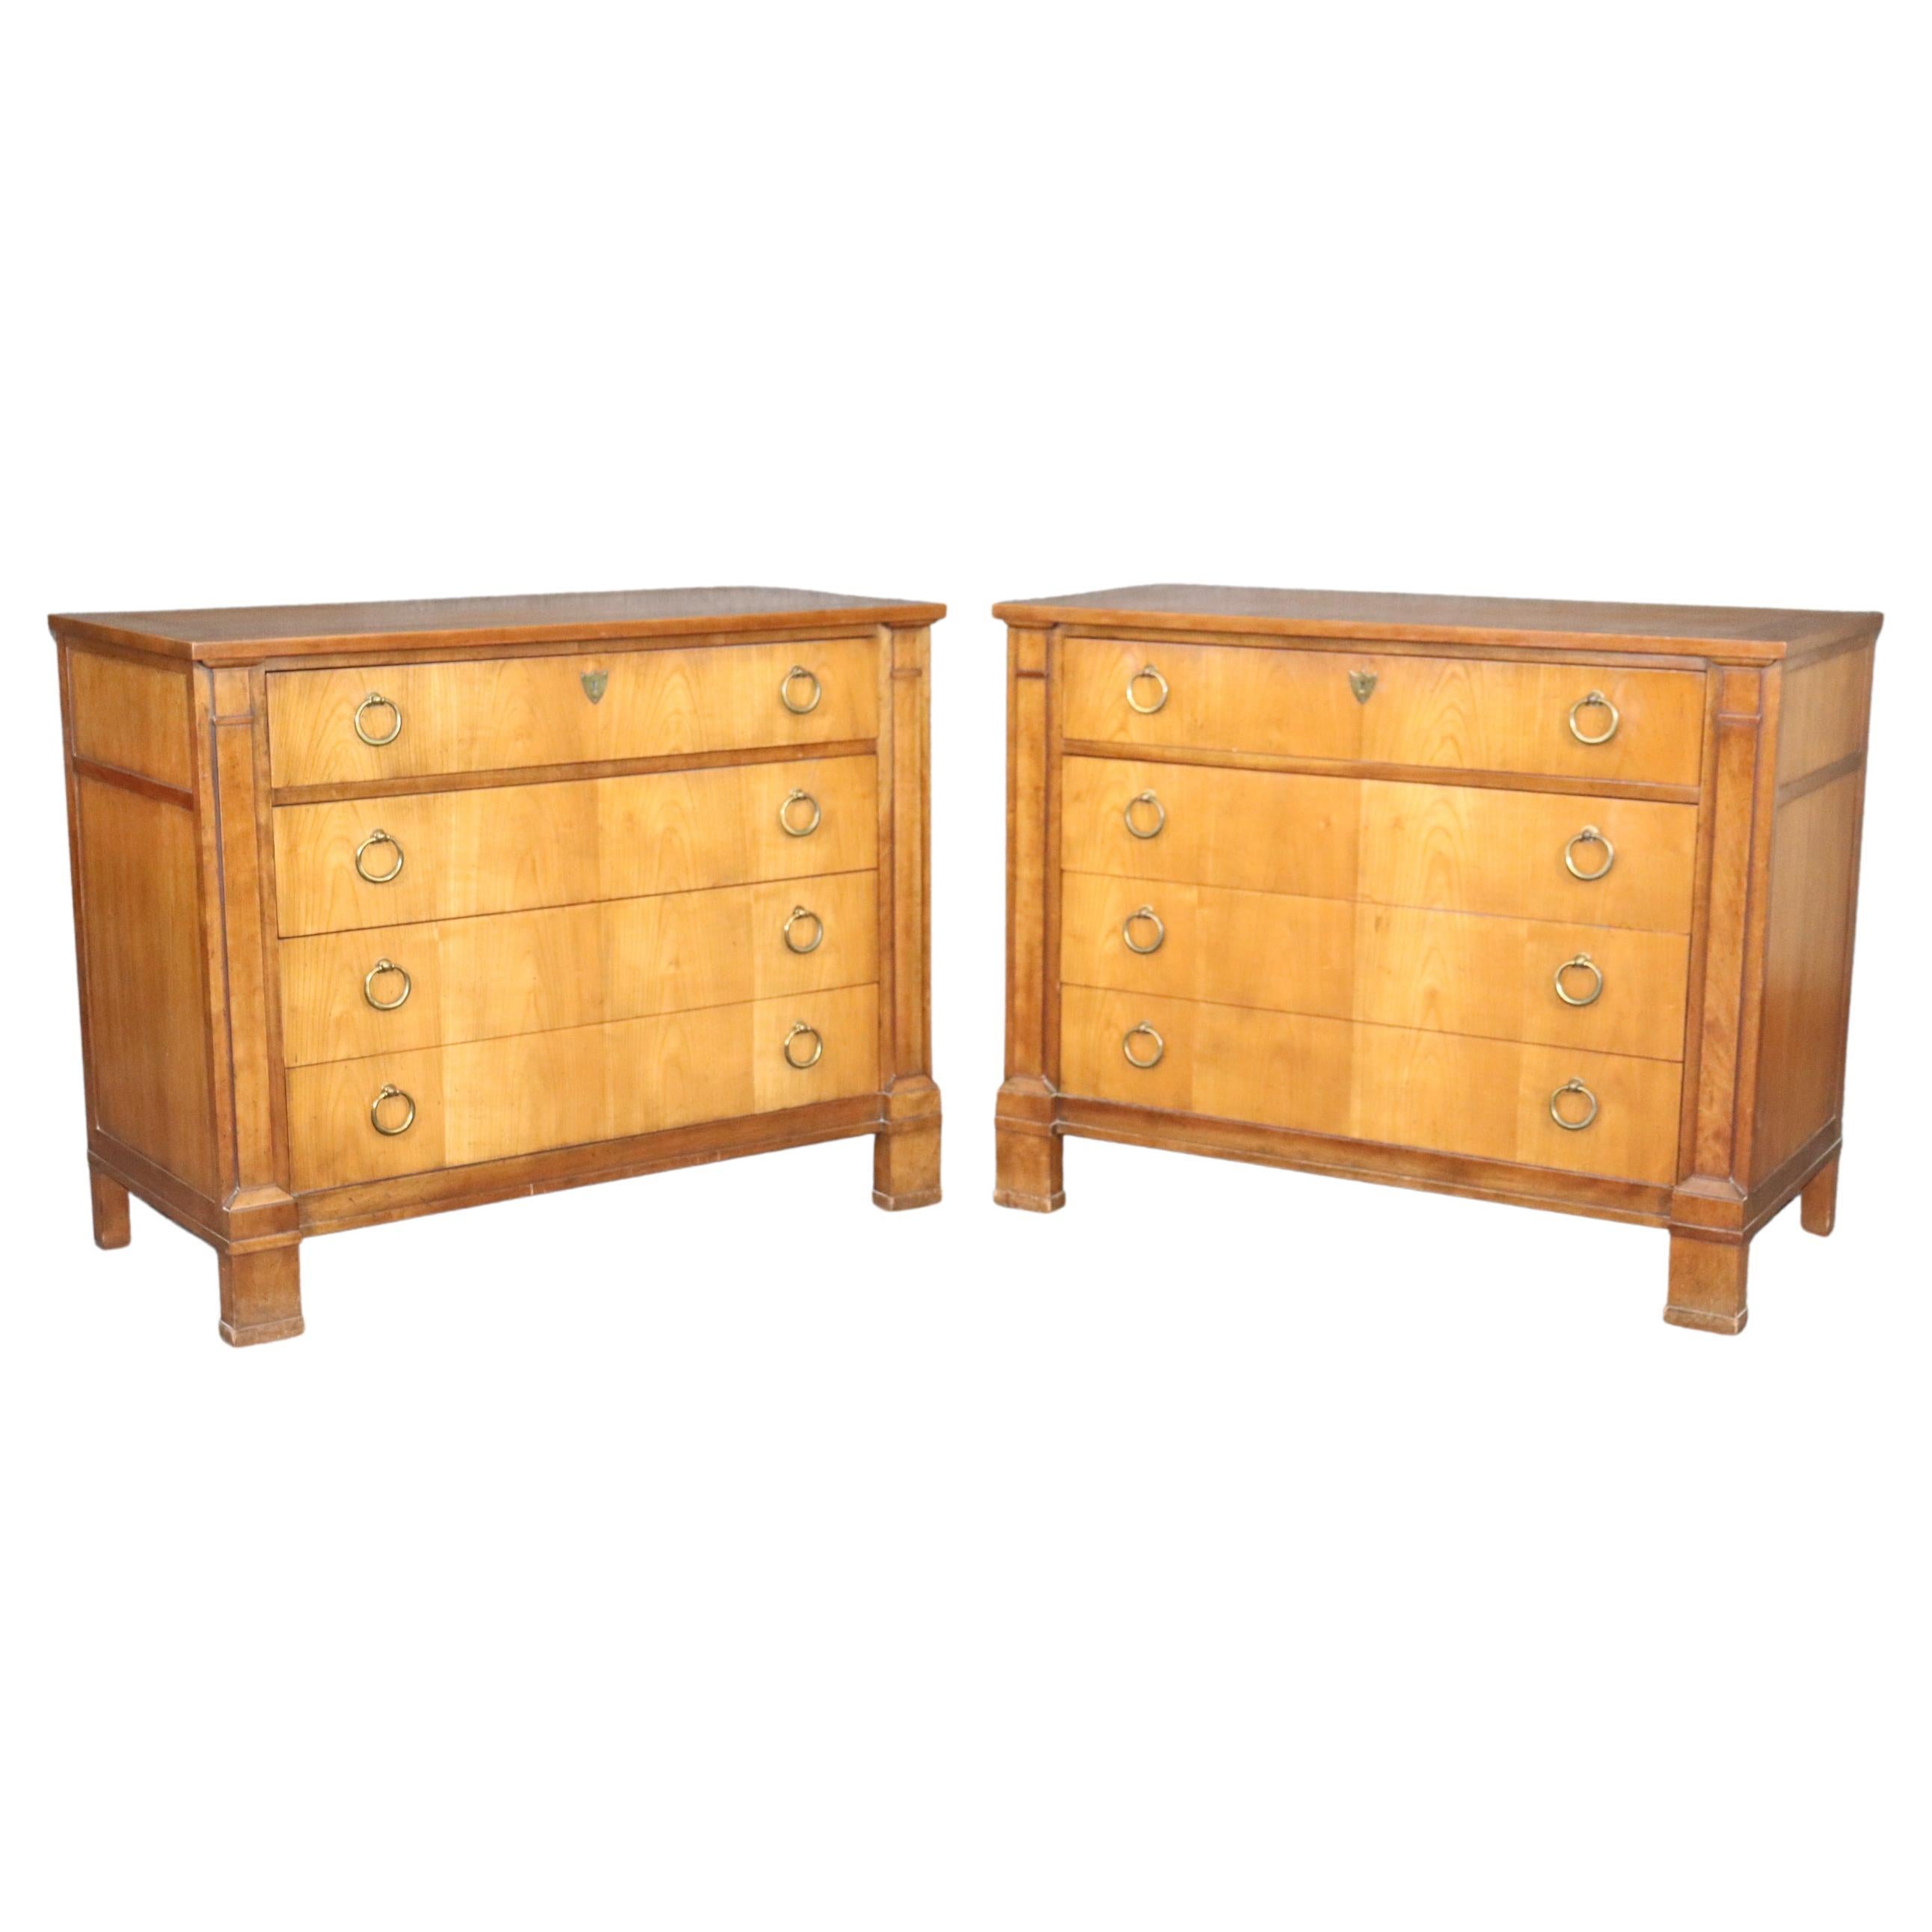 Pair of Cherry Baker Furniture French Directoire Style Commodes with Brass Rings